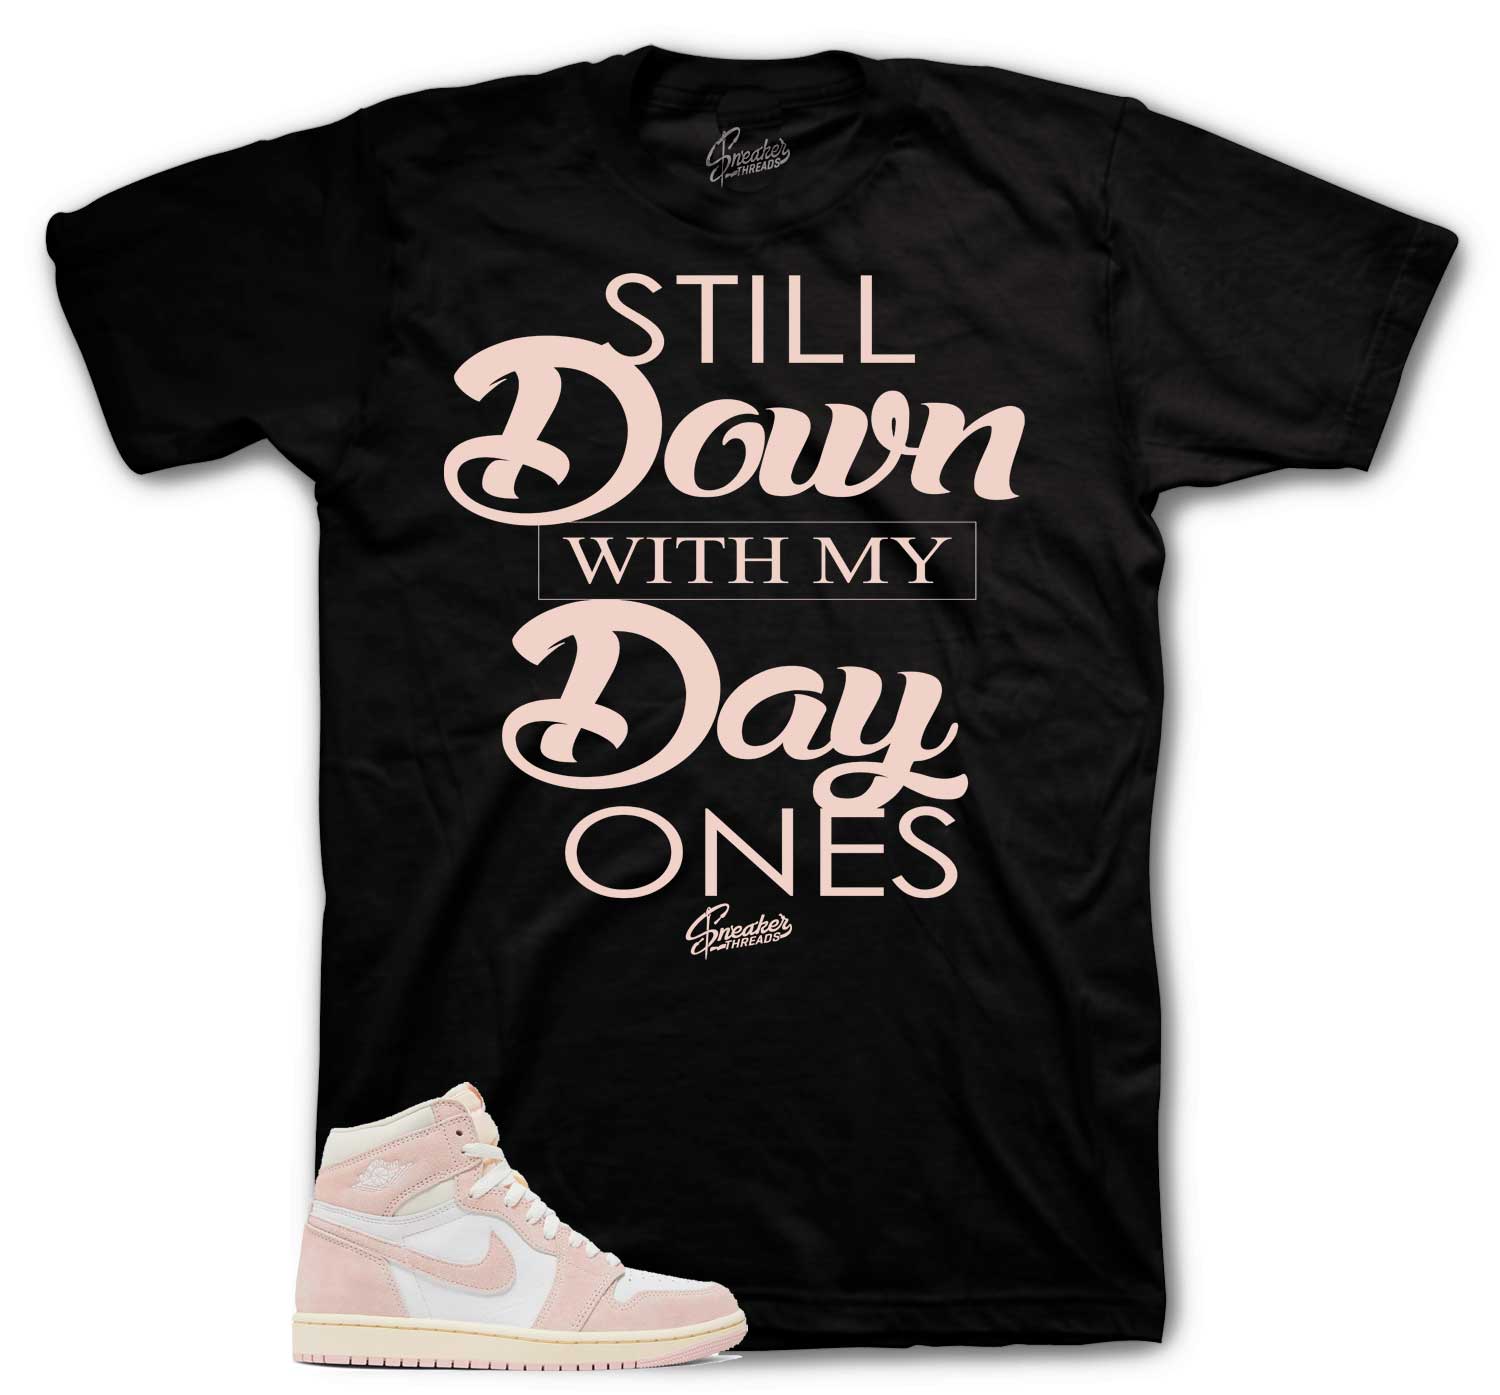 Retro 1 Washed Pink Shirt - Day Ones - Black